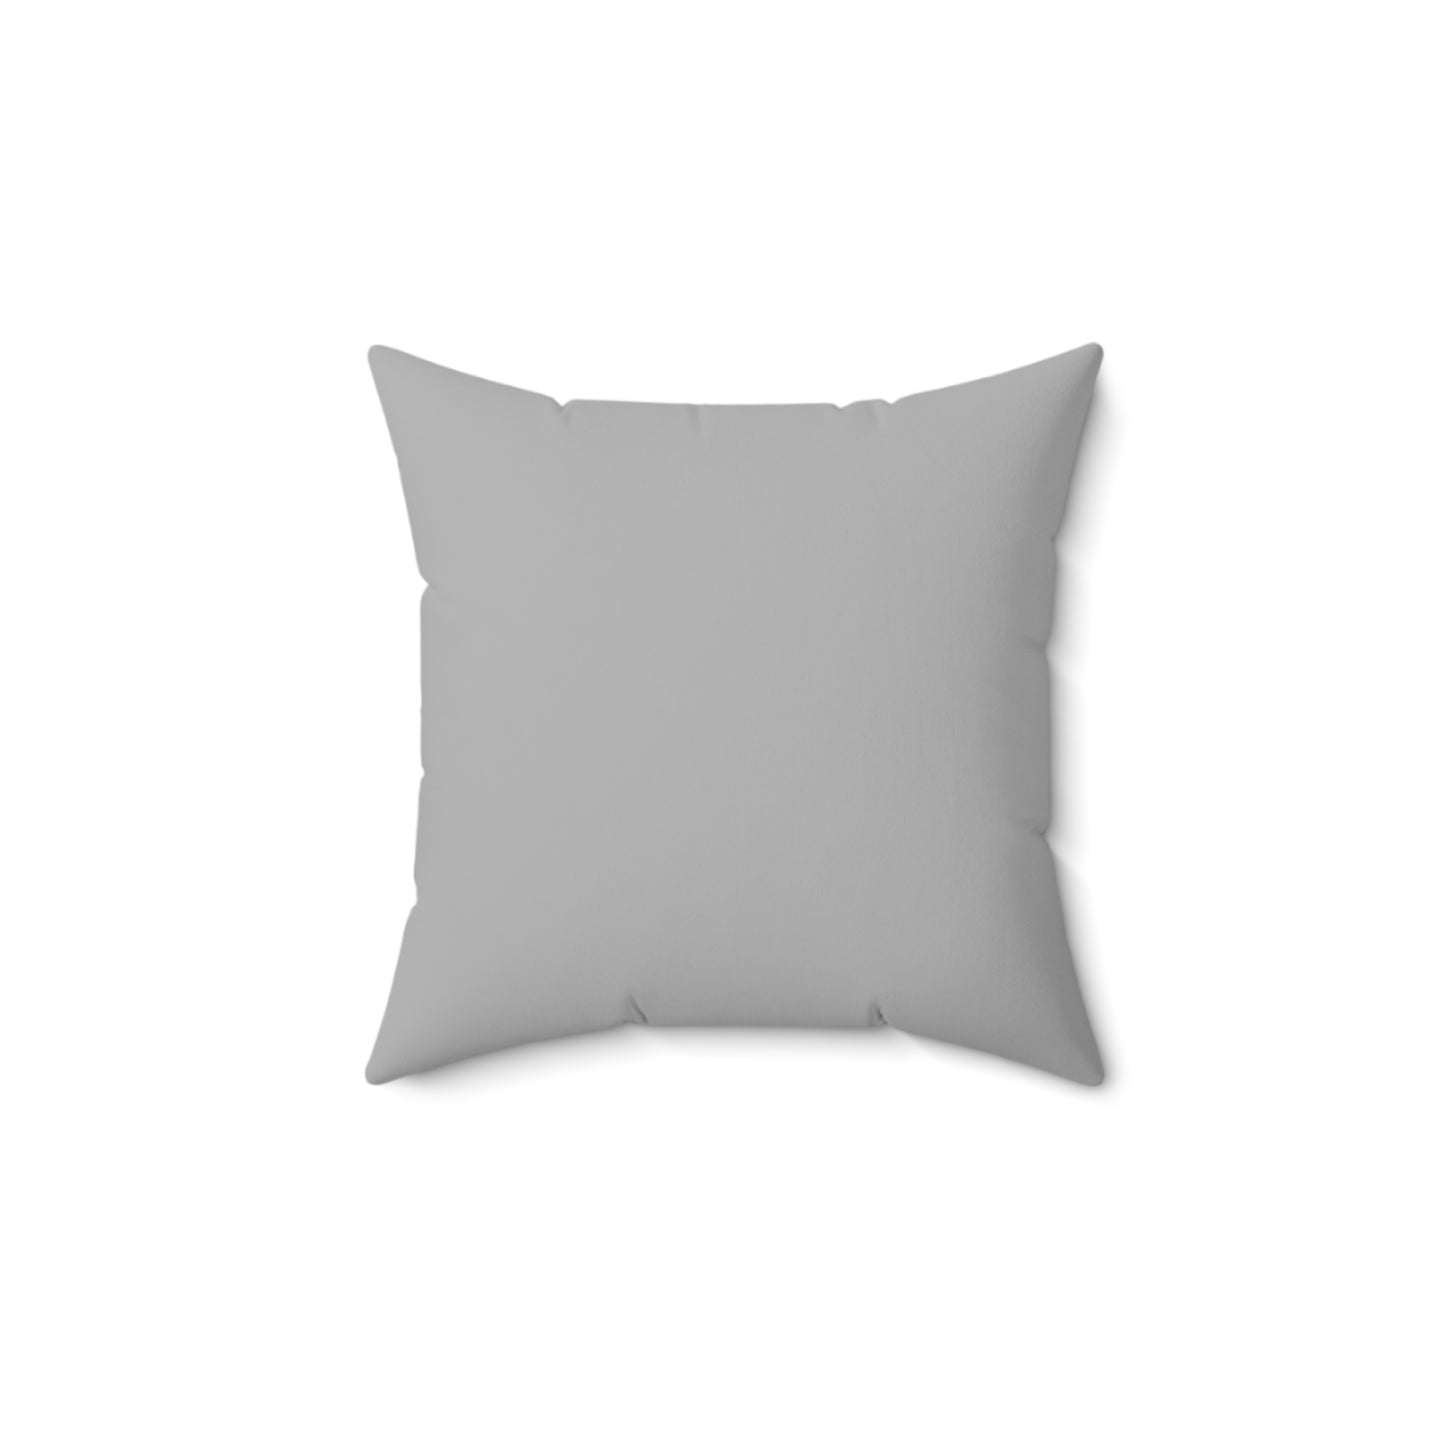 Living Proof That God Answers Prayers  pillow